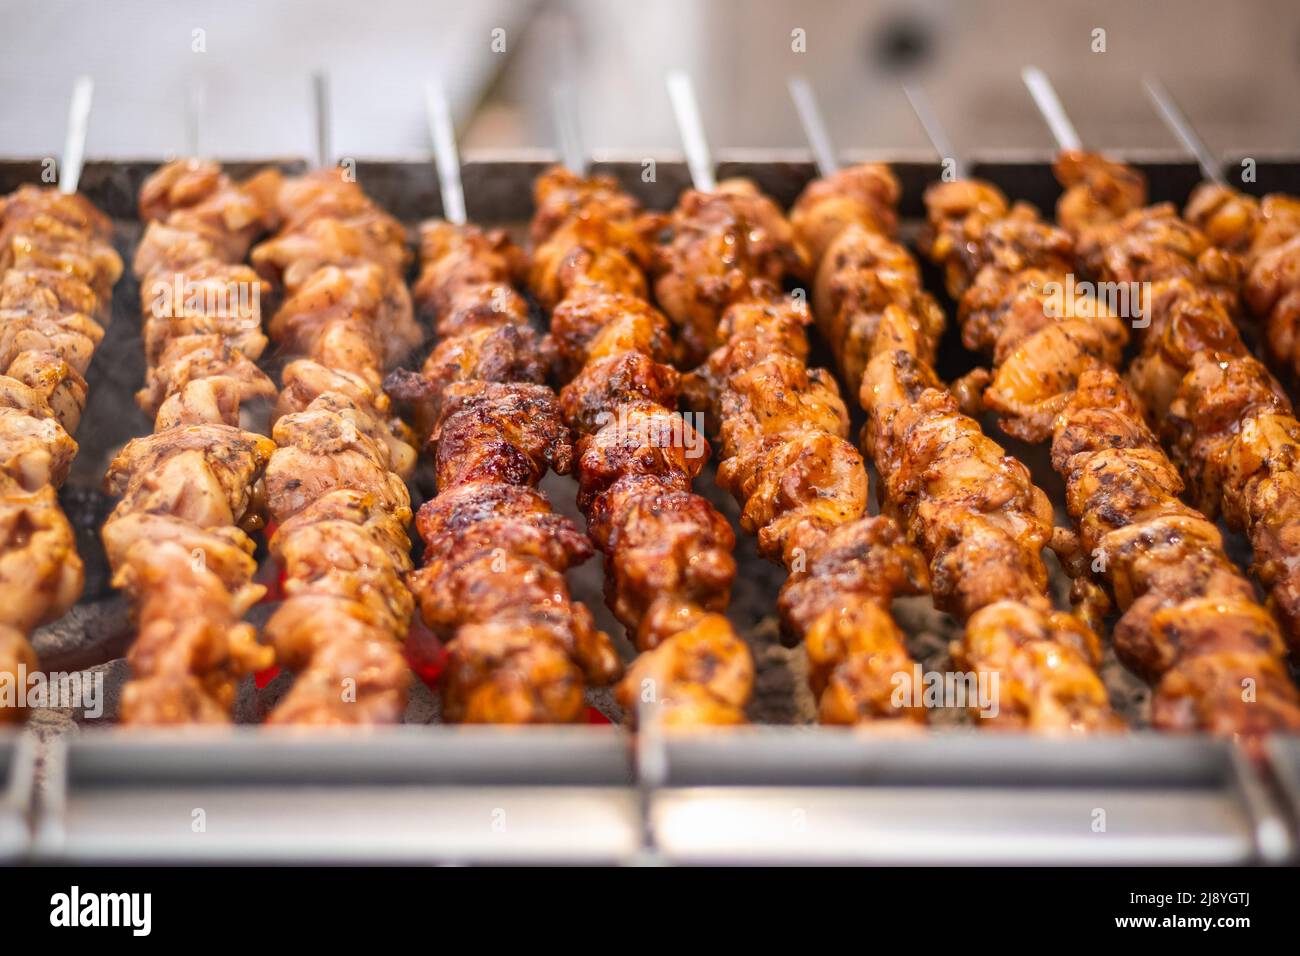 Chicken kebabs cooking on a charcoal grill at Christmas market Hyde Park Winter Wonderland in London Stock Photo